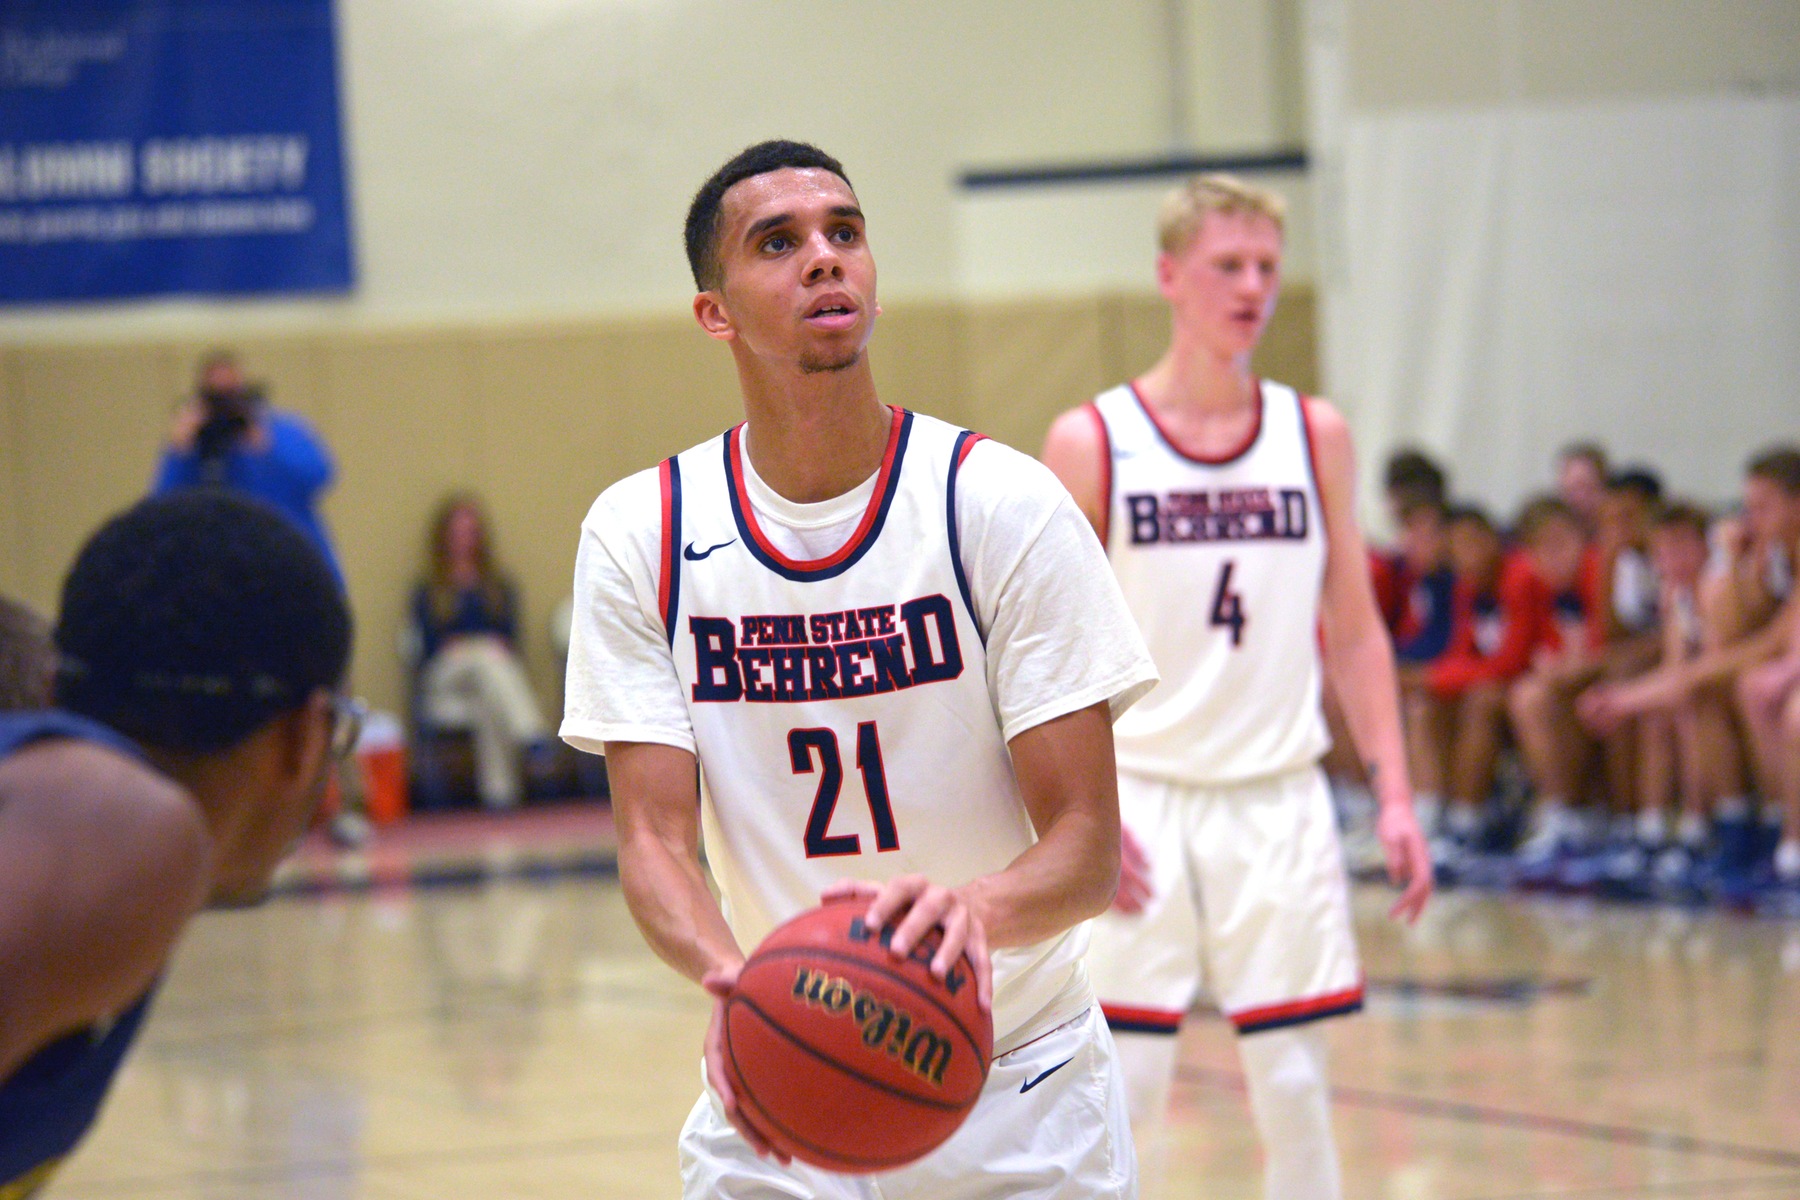 Connors Helps Behrend Basketball Past Medaille